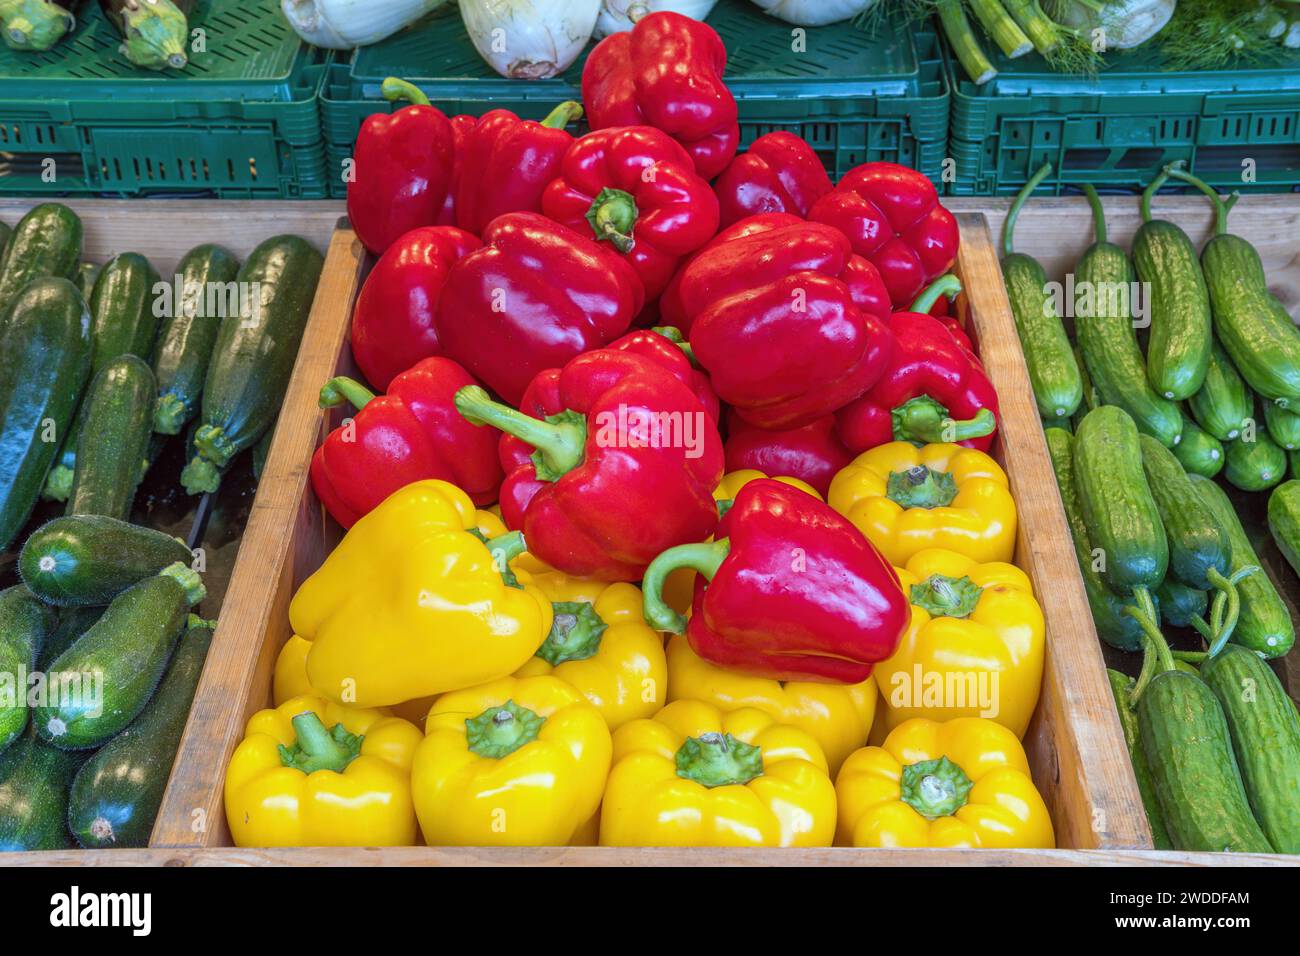 Bell pepper, courgettes and pickles for sale at a market Stock Photo